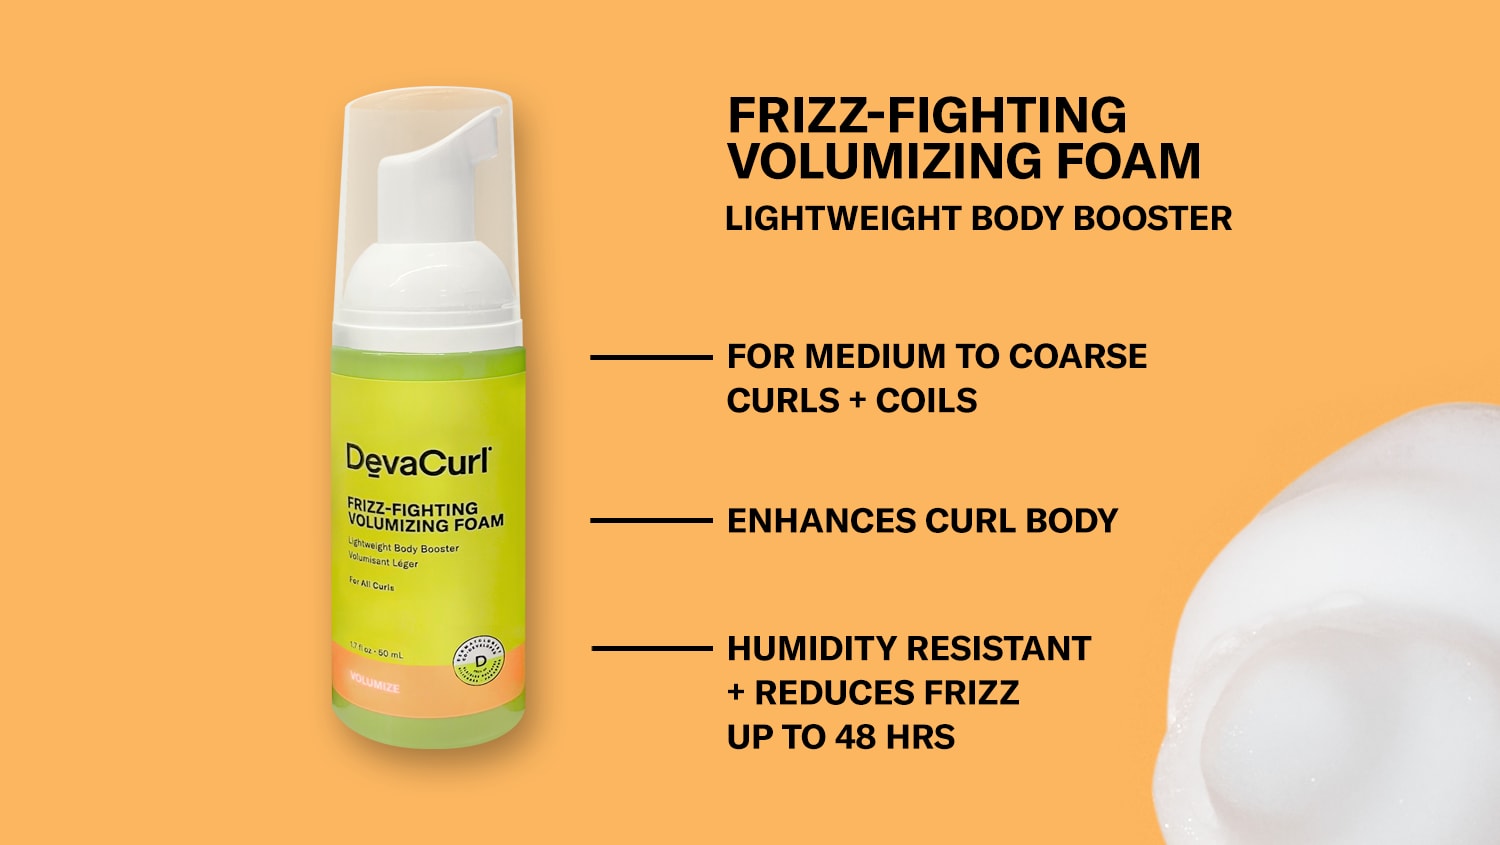 frizz-fighting volumizing foam bottle + goop with listed benefits